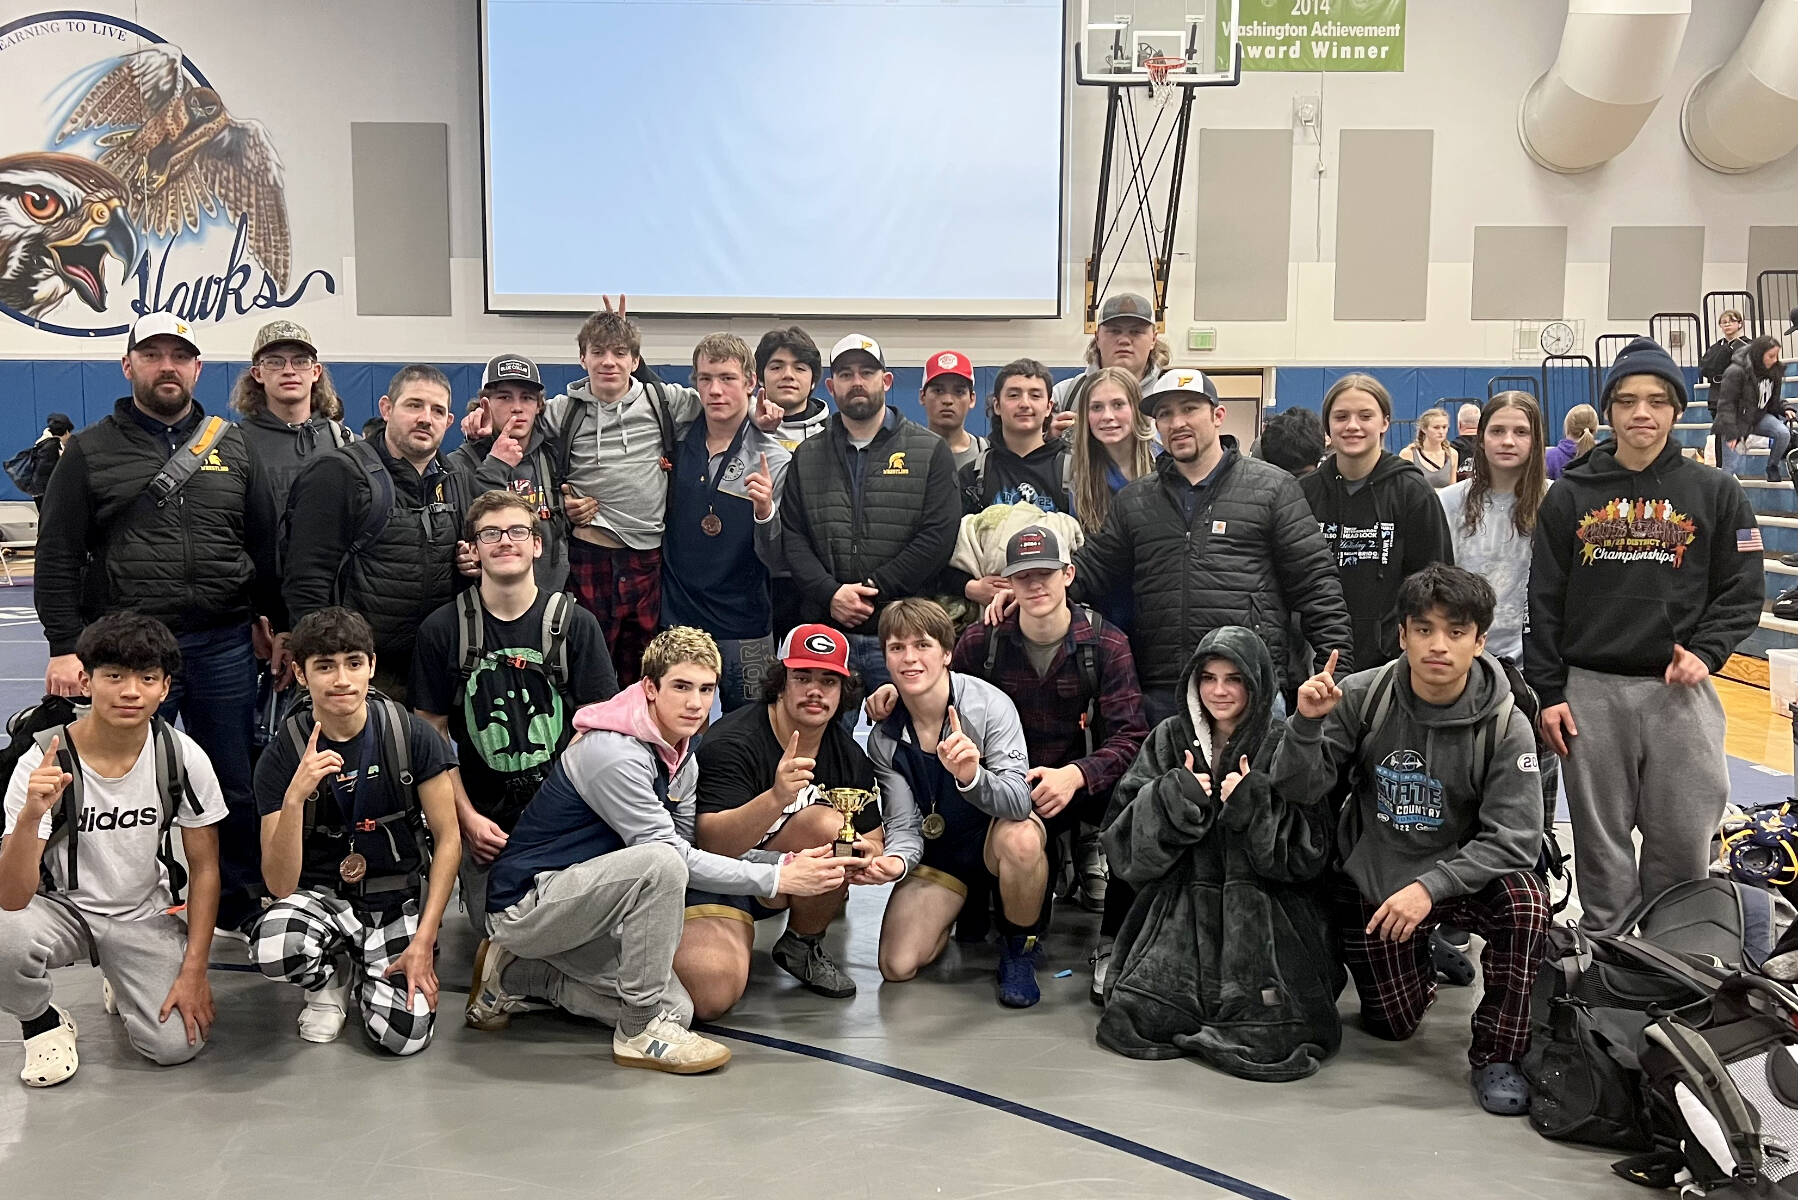 The Forks wrestling team celebrates the boys’ seventh tournament victory this season at the River Ridge Rumble in Lacey this weekend. The Spartans beat out mostly 3A and 4A schools to win this tournament. (Courtesy of Forks wrestling)